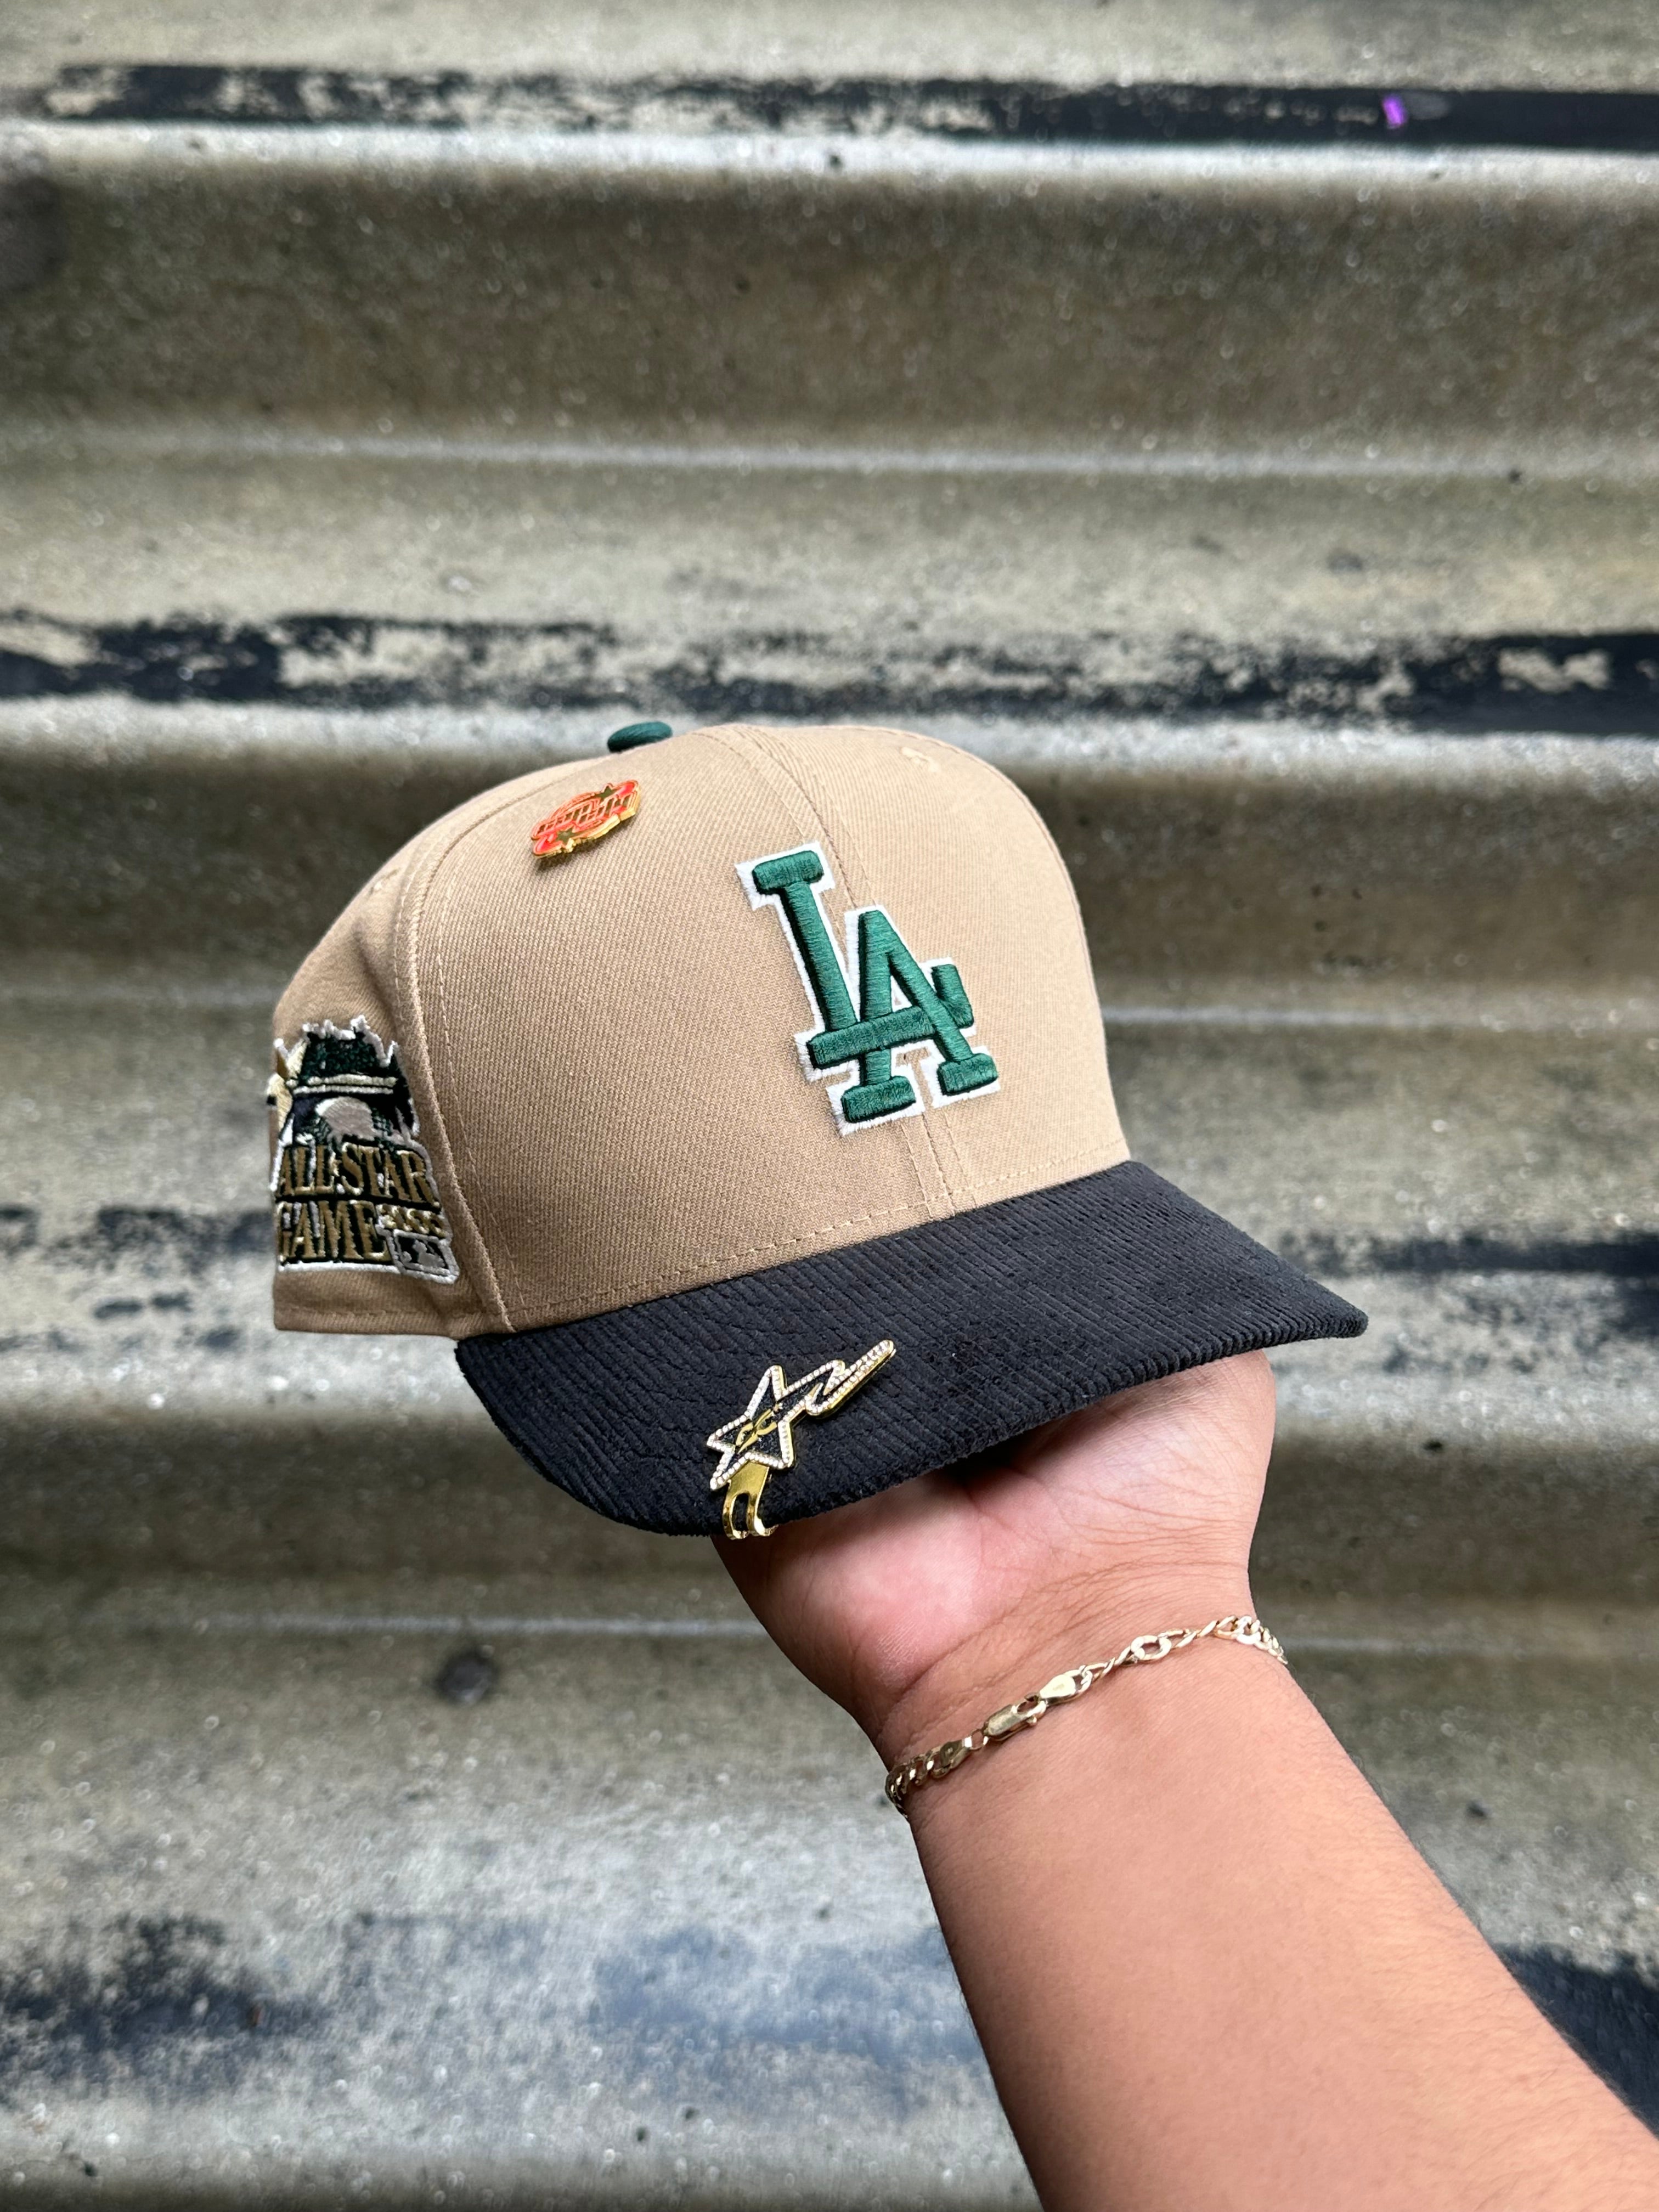 NEW ERA EXCLUSIVE 9FIFTY KHAKI/CORDUROY LOS ANGELES DODGERS SNAPBACK W/ 2000 ALL STAR GAME PATCH